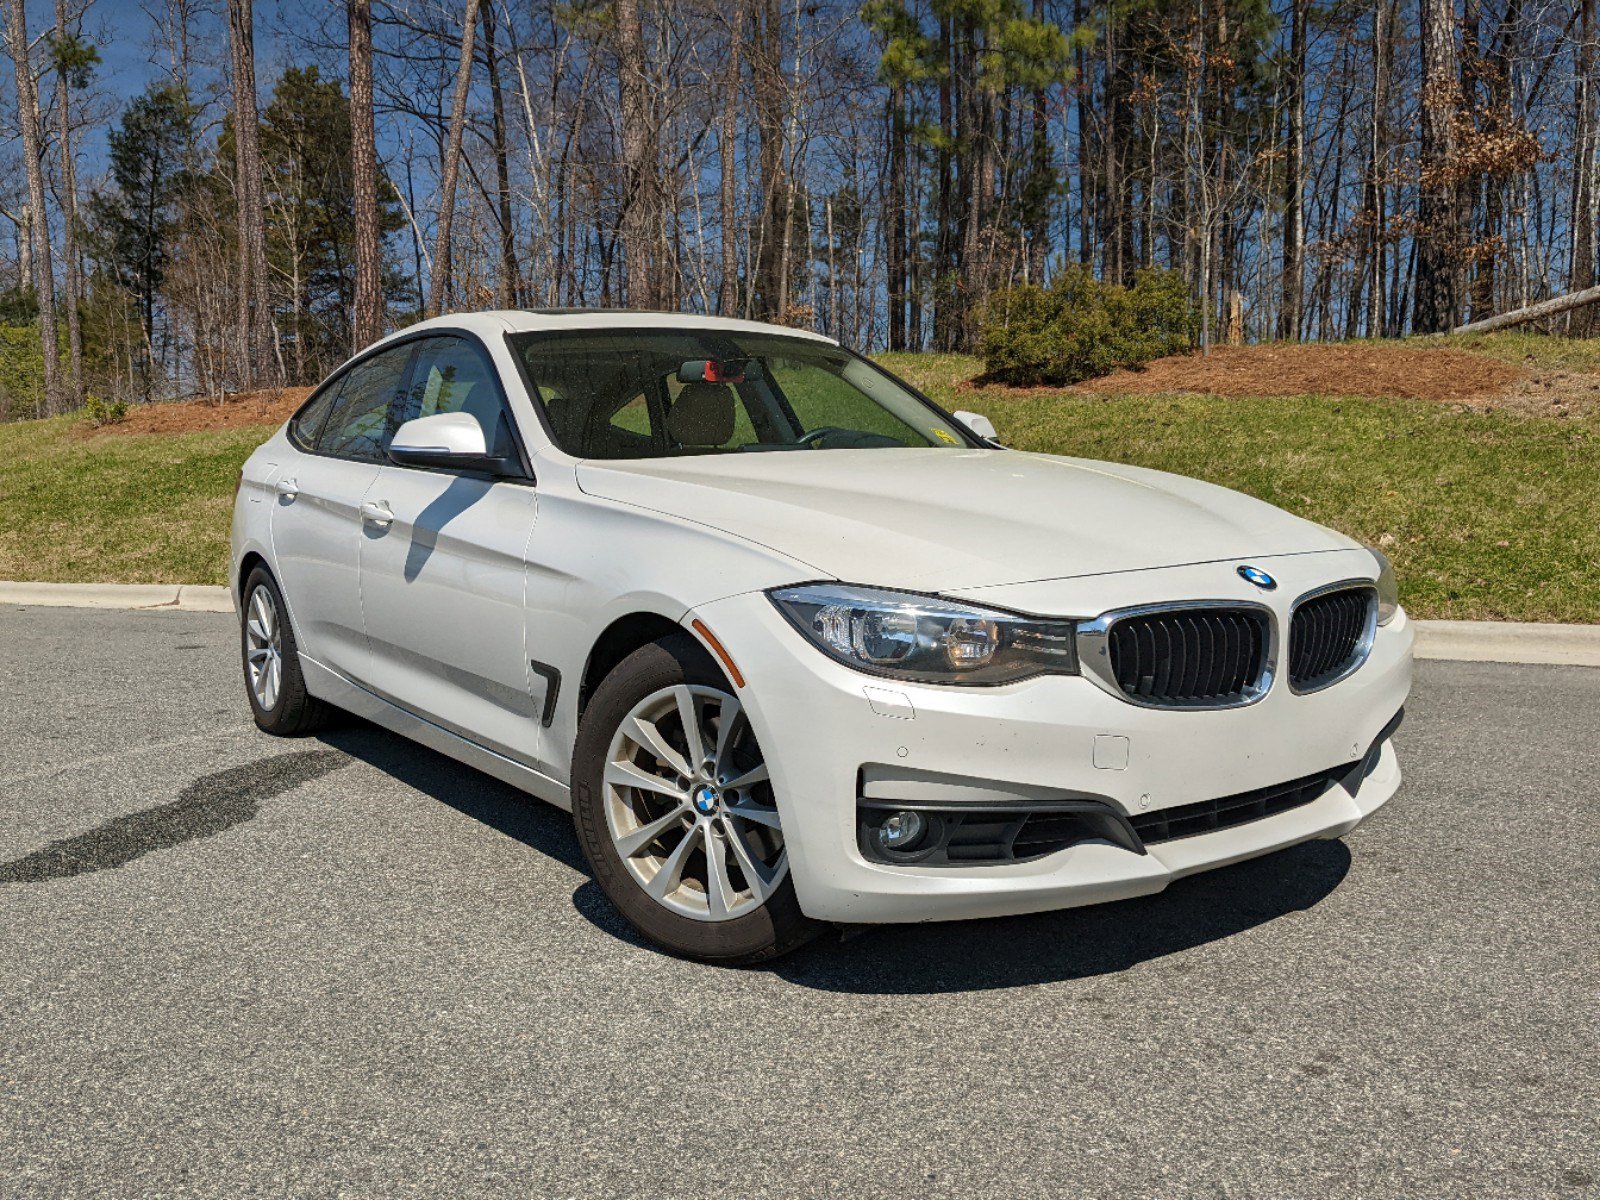 Pre-Owned 2015 BMW 3 Series Gran Turismo 328i xDrive Hatchback in Cary  #QB0826A | Hendrick Dodge Cary